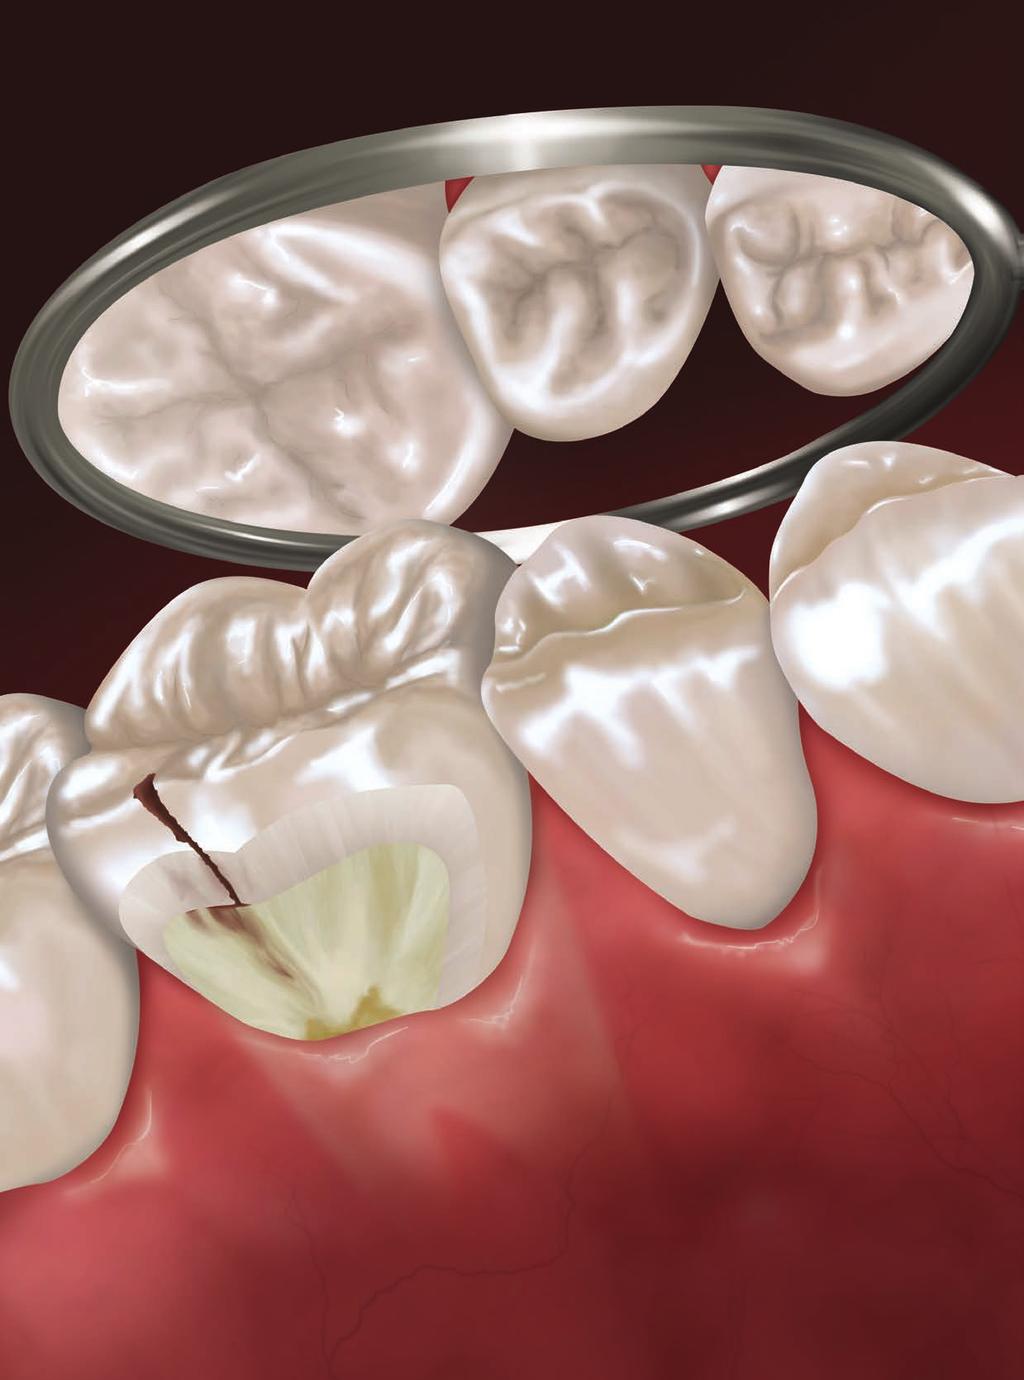 in this section Enamel Caries and Dentin Caries by Trisha E. O Hehir, RDH, MS Hygienetown Editorial Director When I was a child, going to the dentist was a scary and often painful experience.